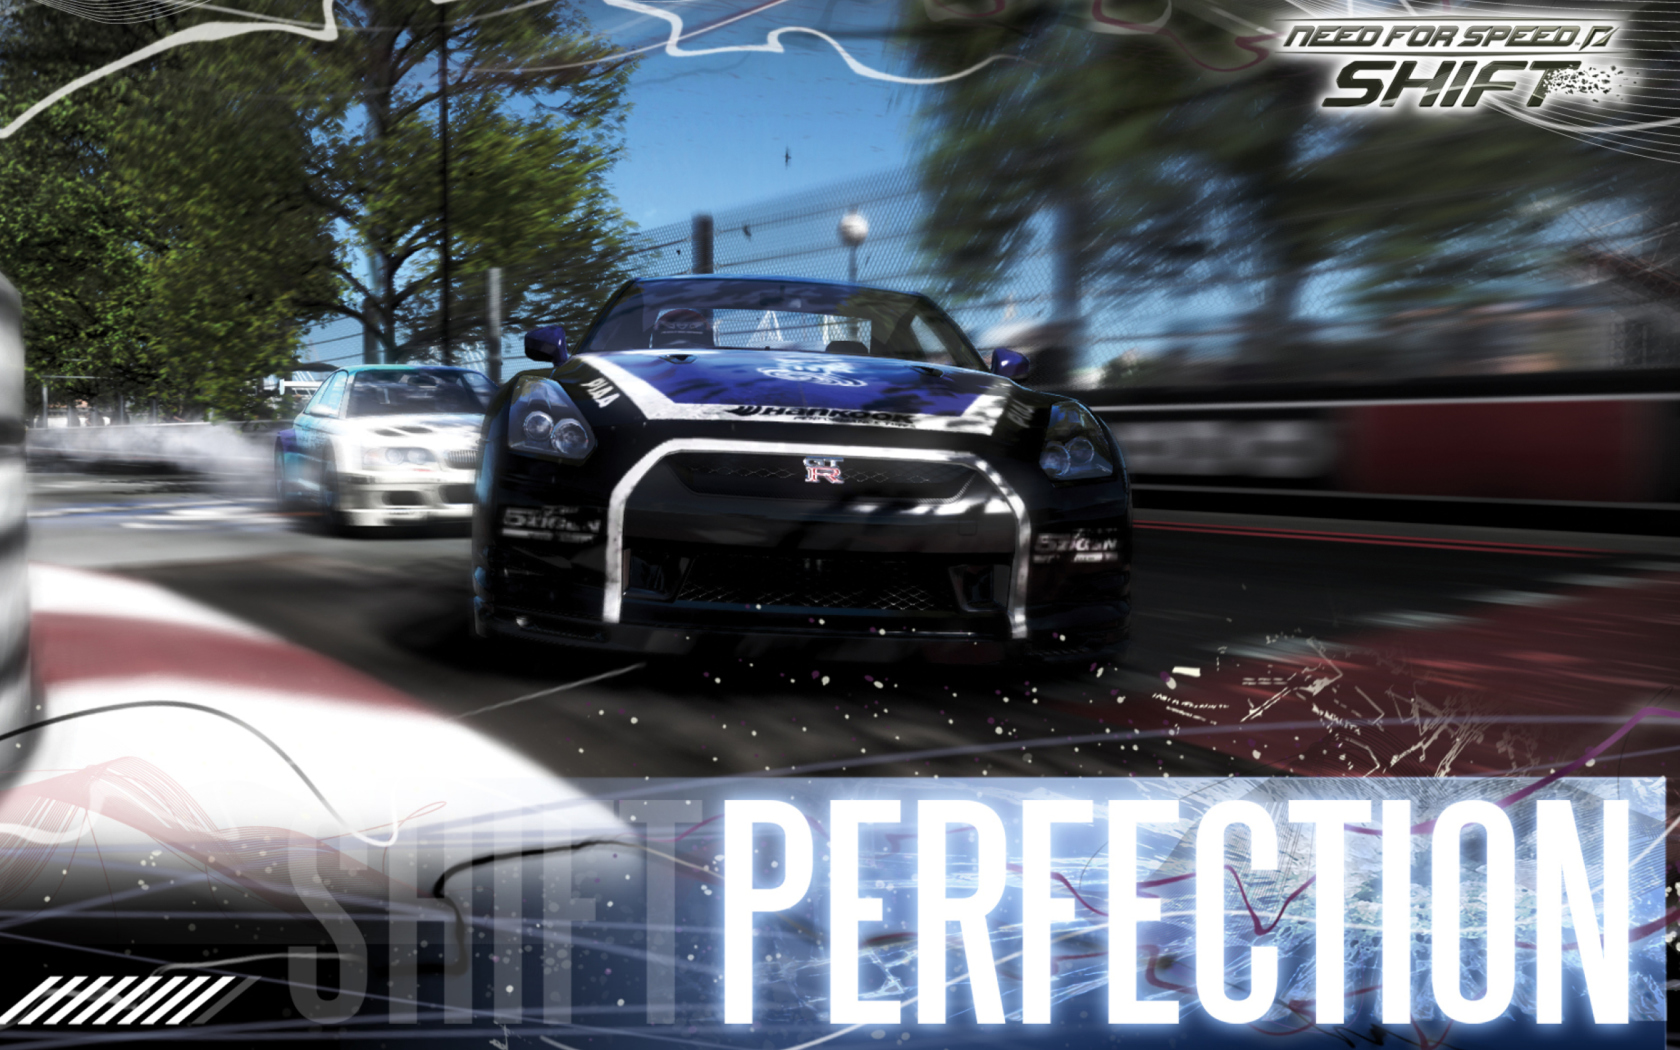 Need for Speed: Shift wallpaper 1680x1050